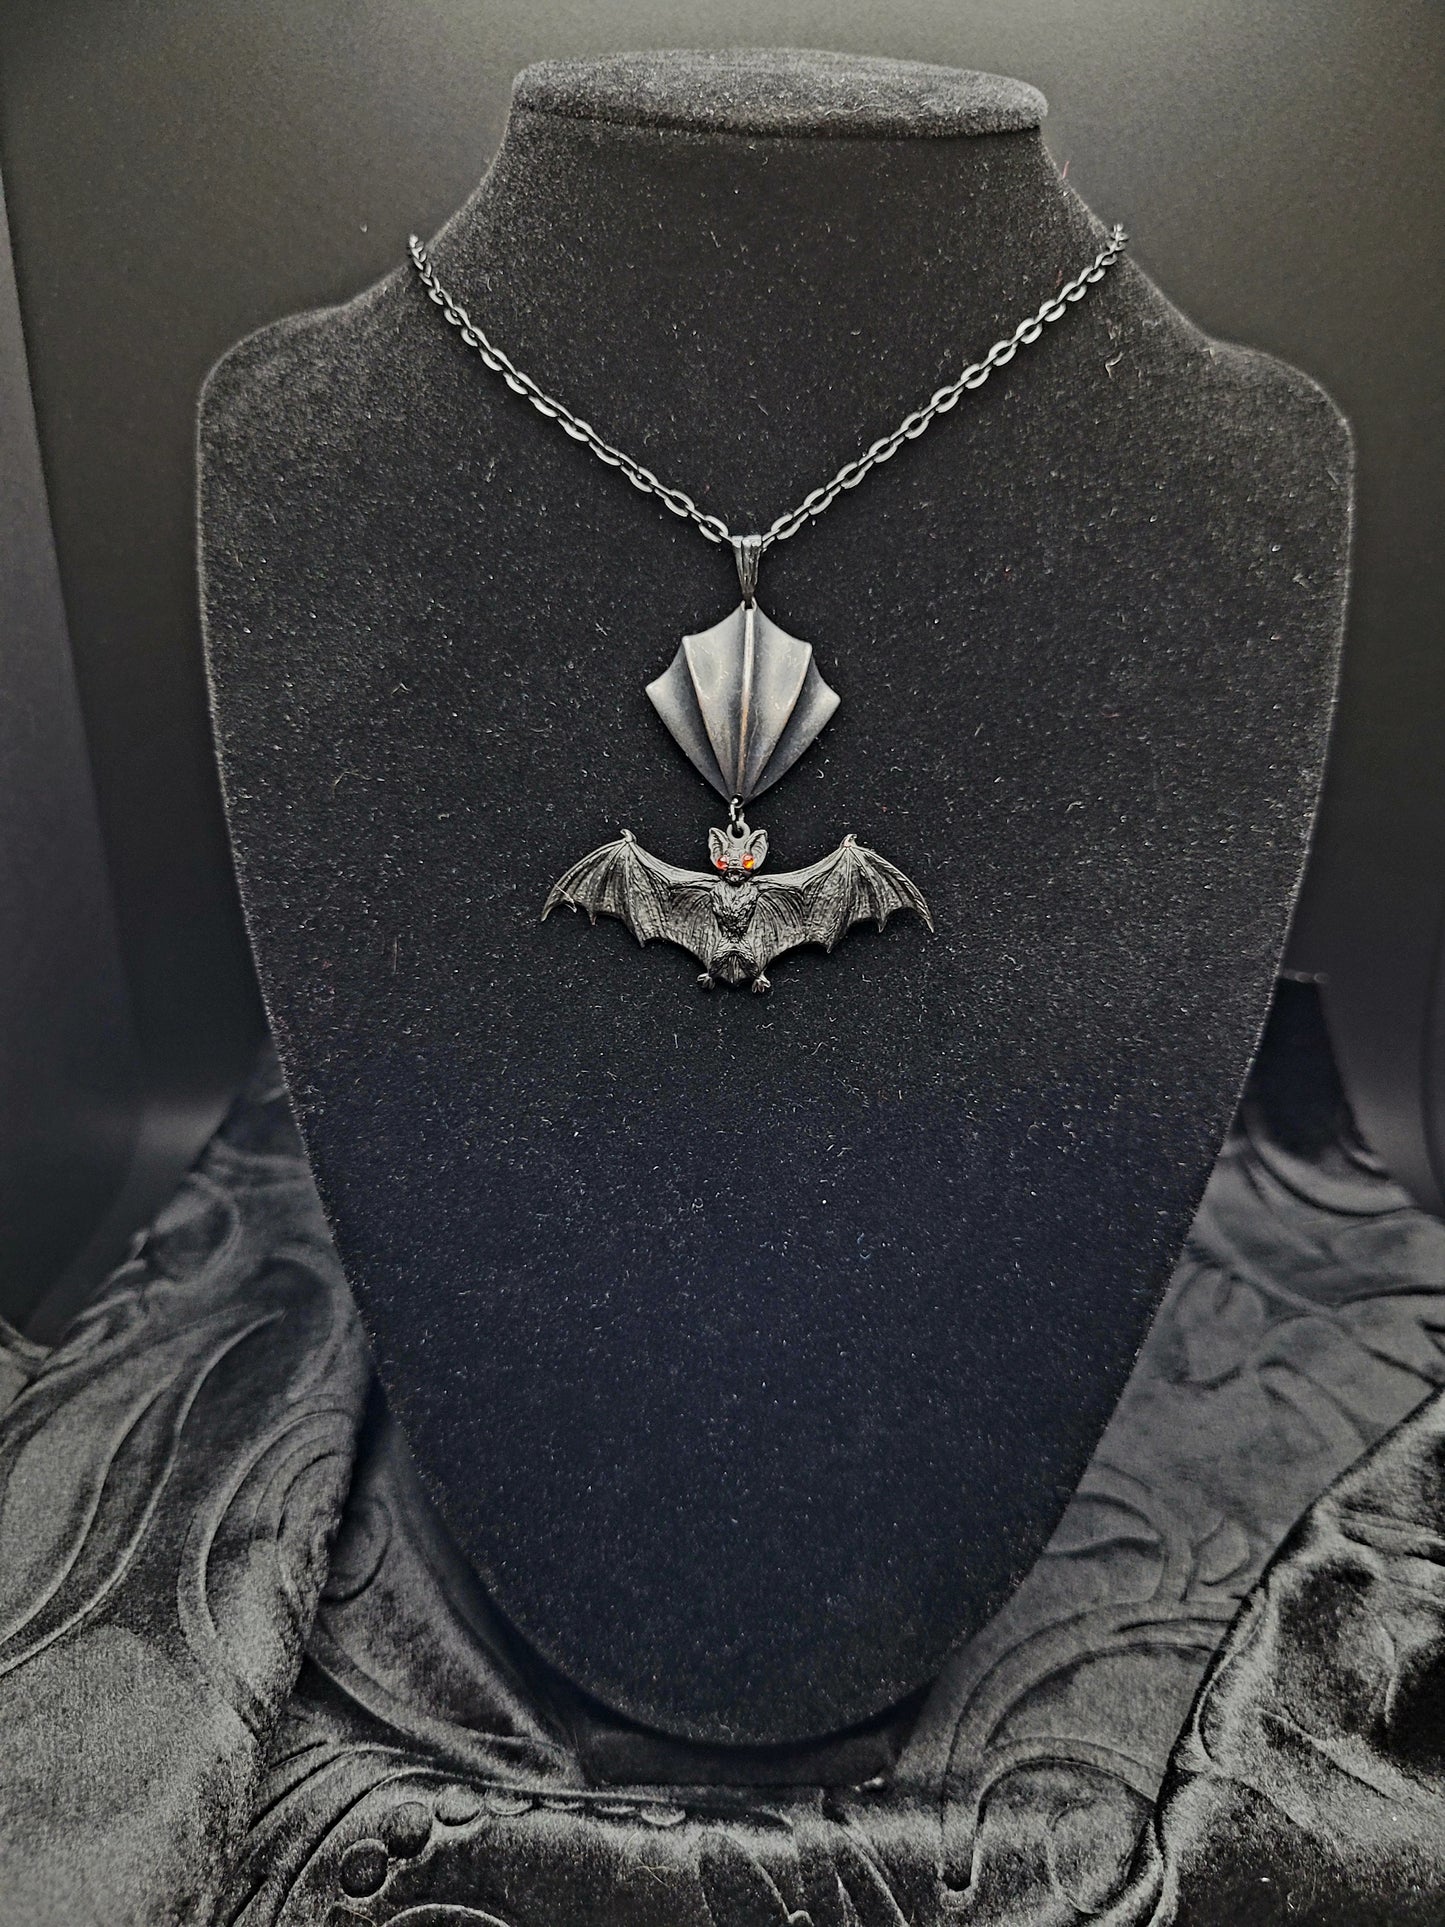 Goth Black Resin Bat Necklace with Red Eyes and Bat Wing Connector